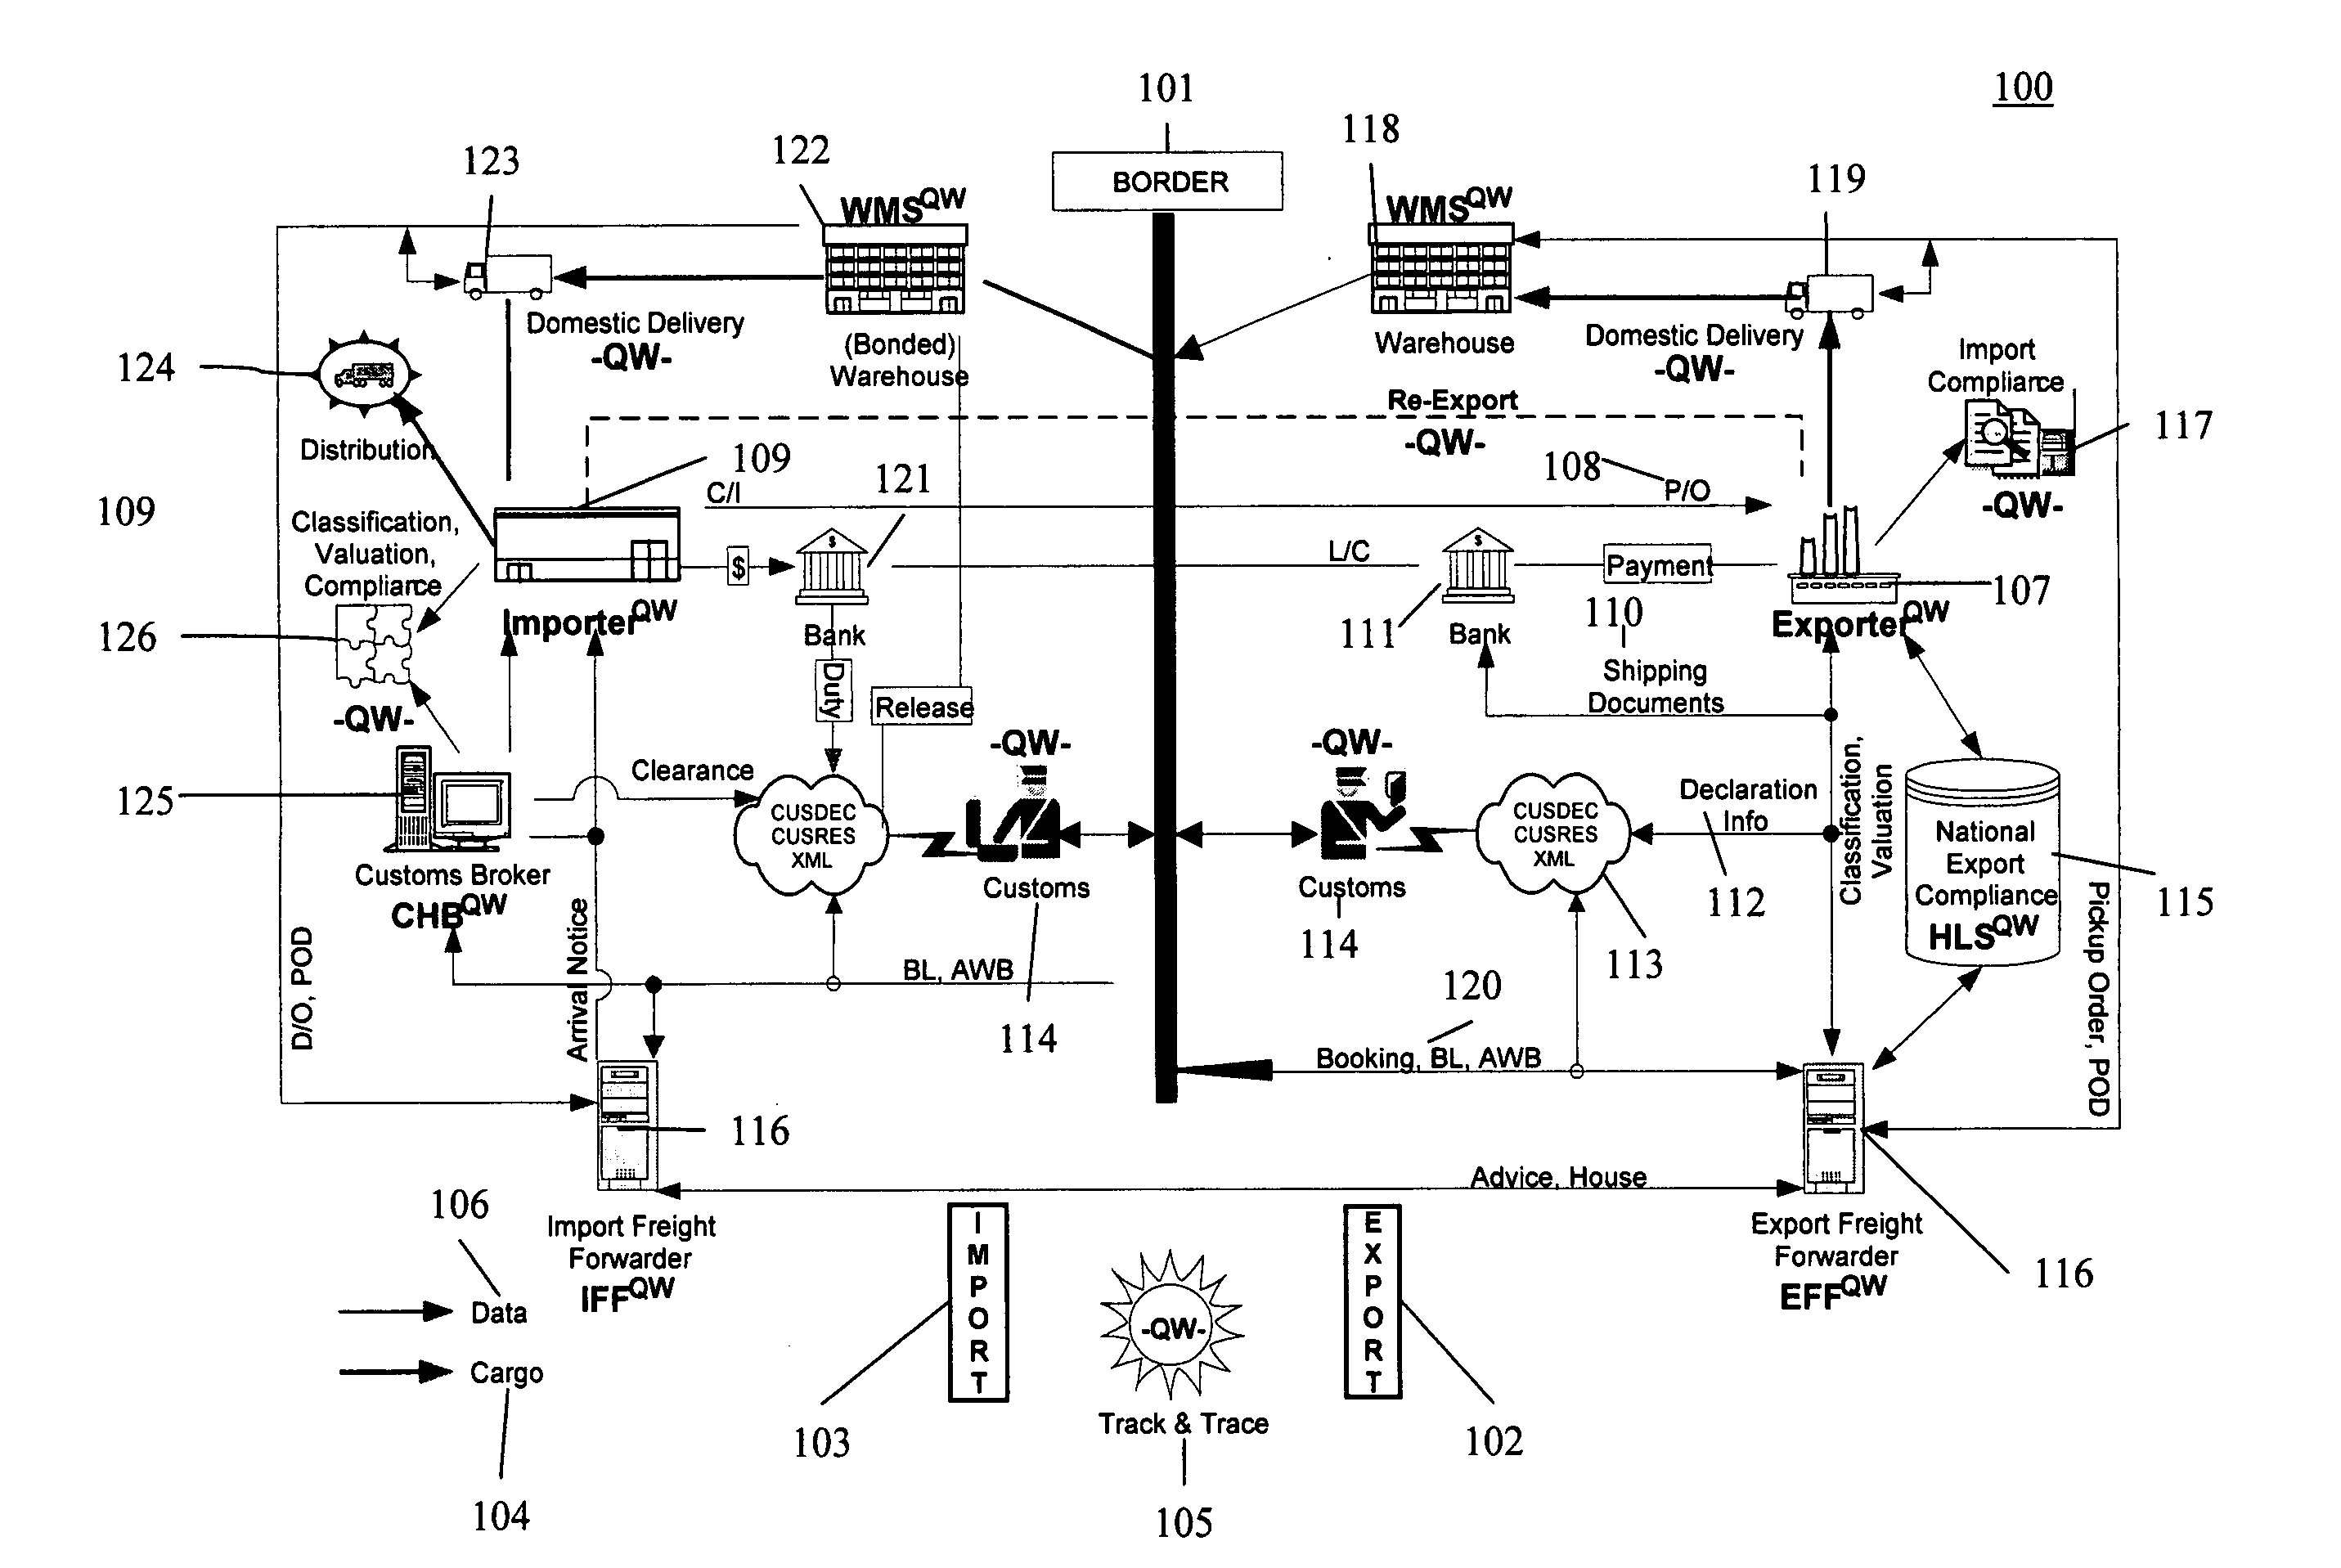 Method and system for managing multi-national integrated trade and logistics and processes for efficient, timely, and compliant movement of goods across international borders